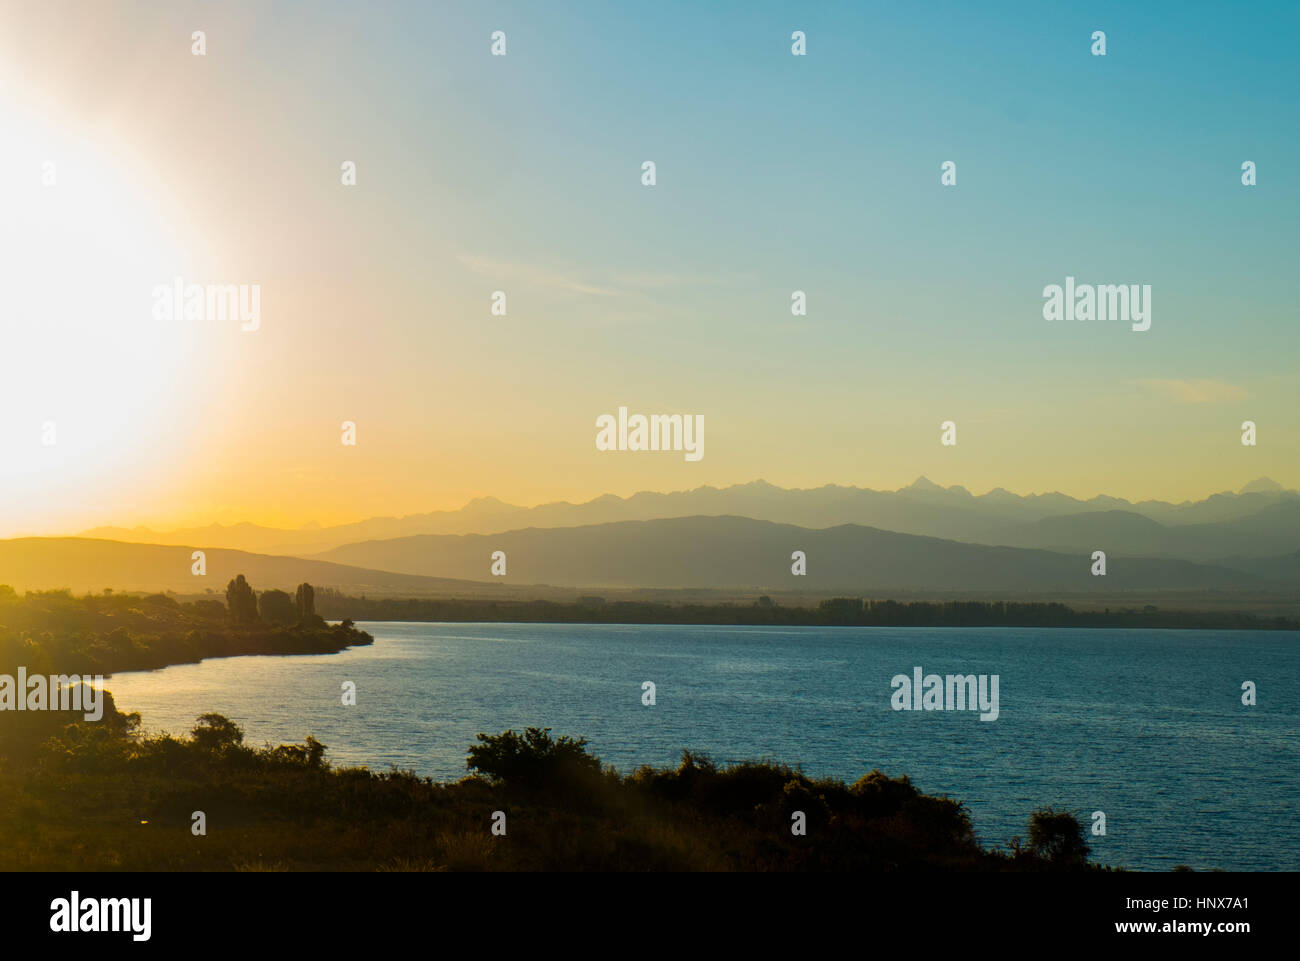 Landscape view of lake and mountains at sunrise, Kyrgyzstan, Central Asia Stock Photo